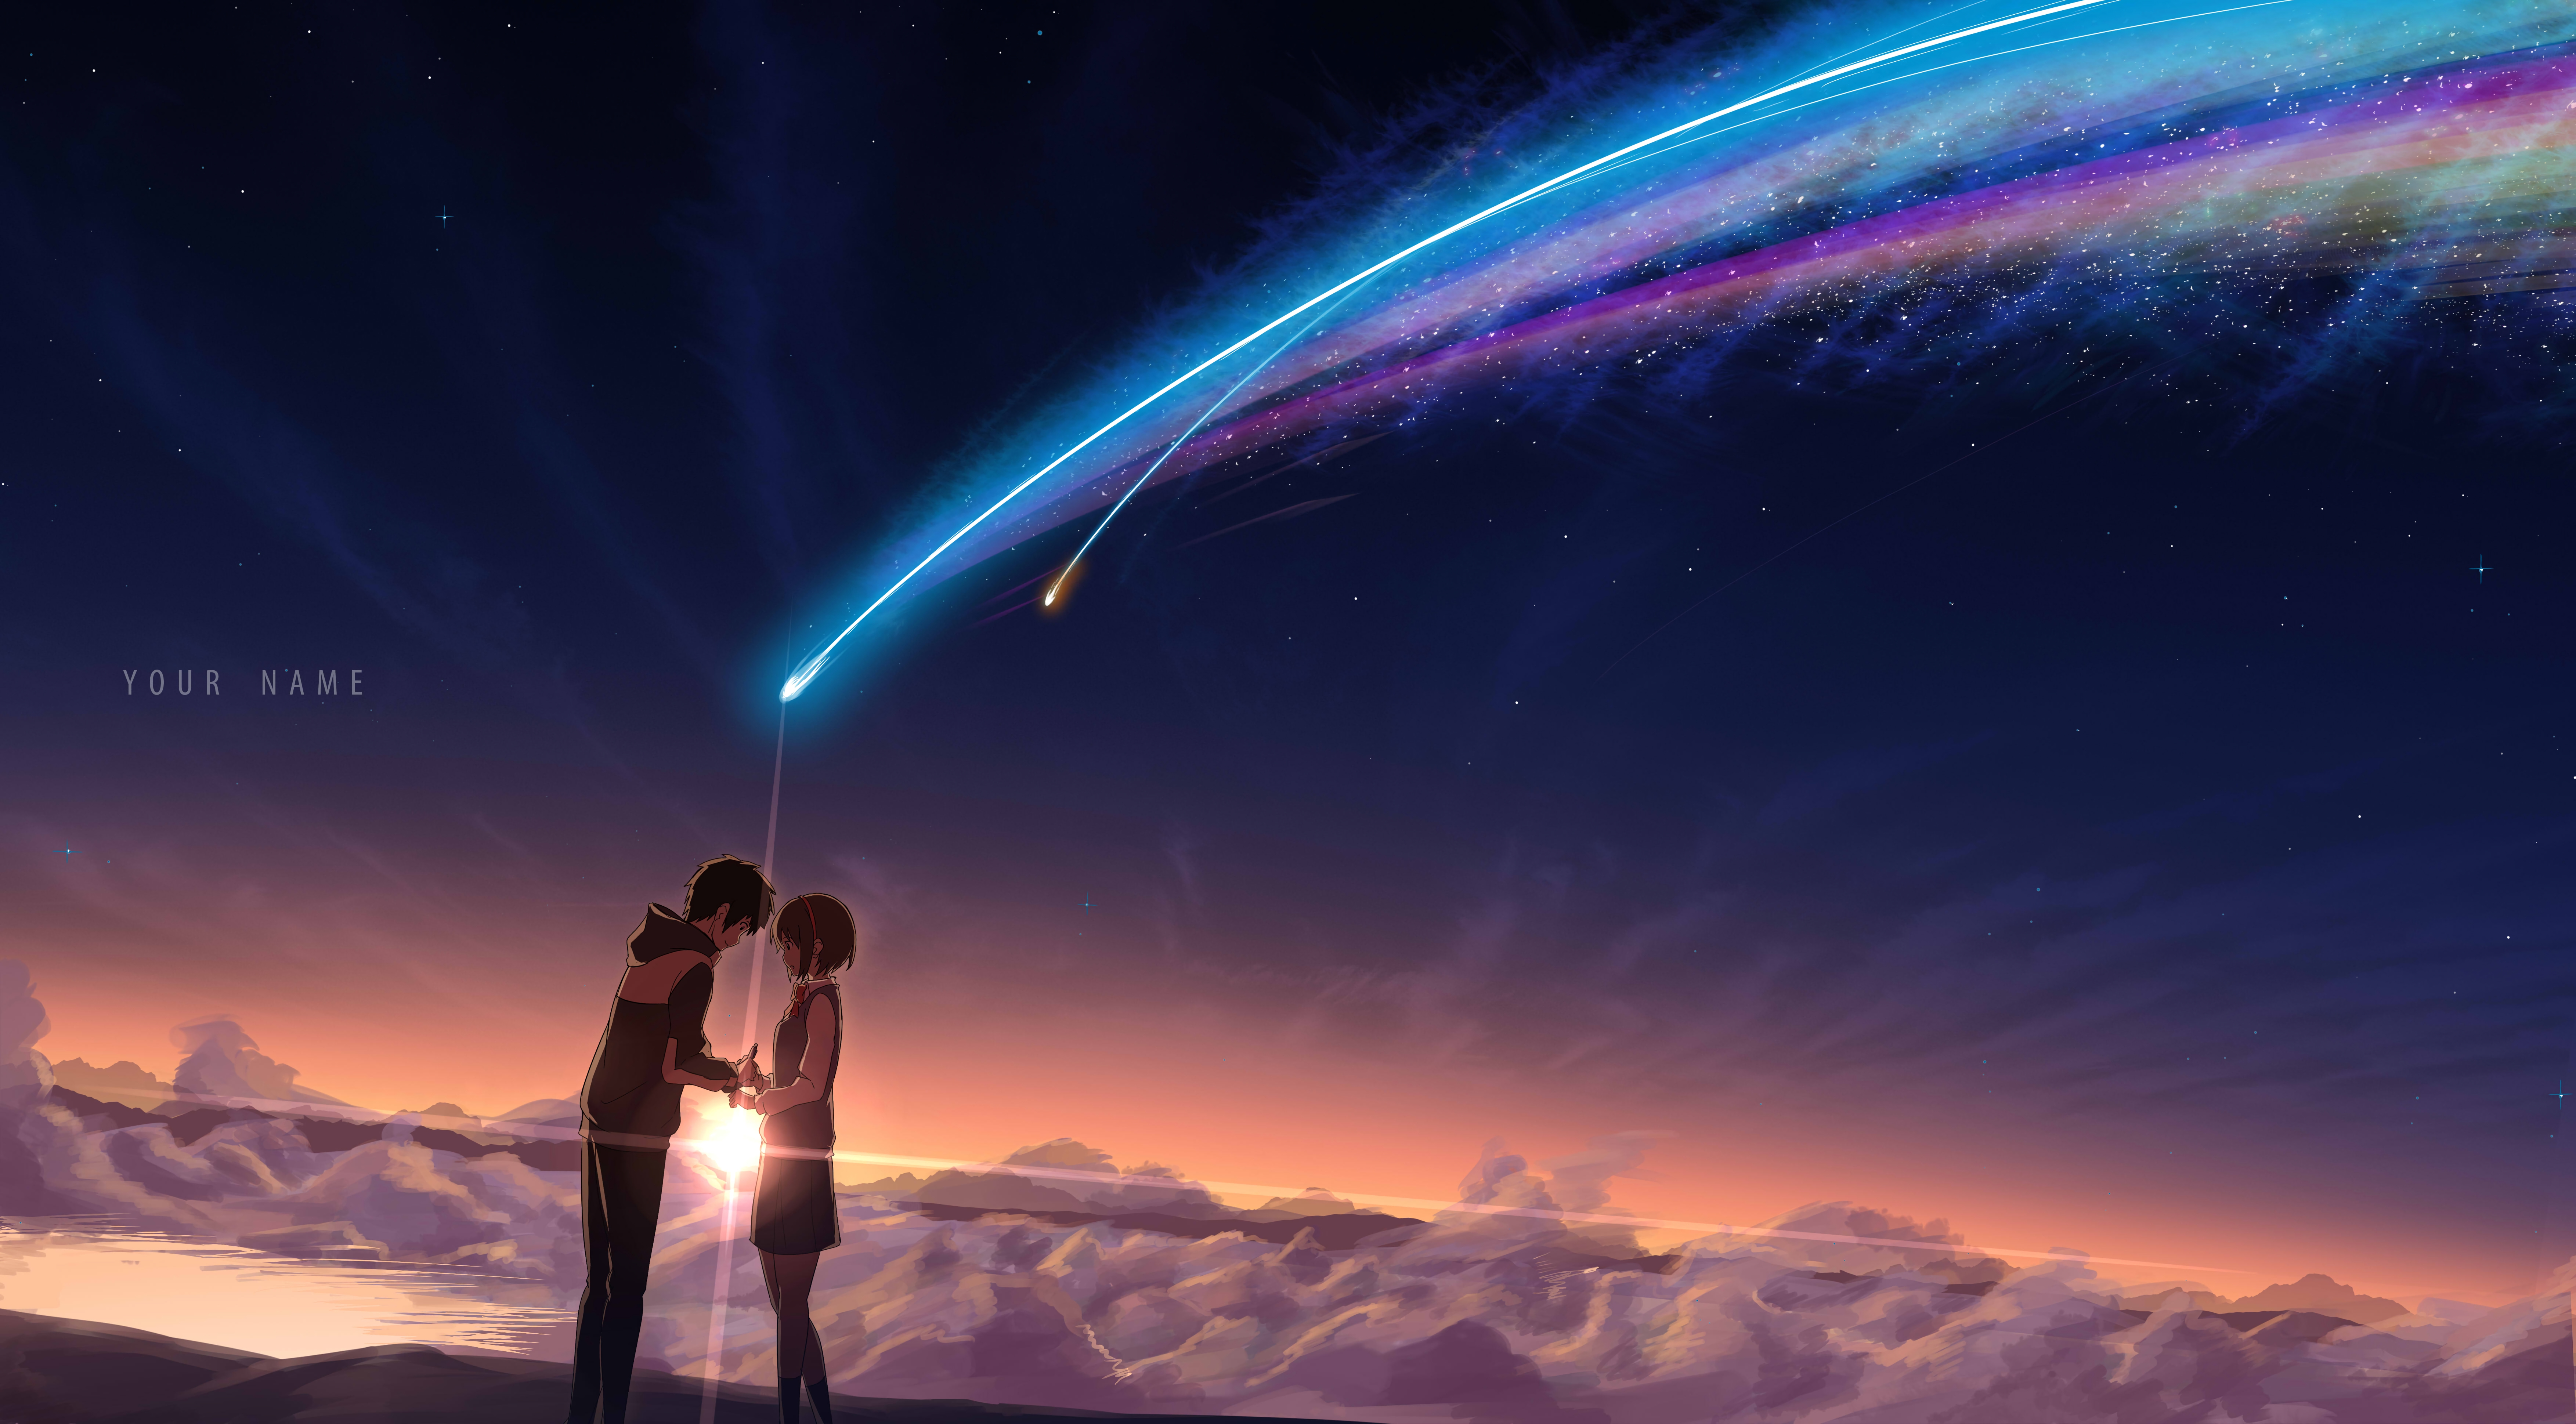 Your Name. 4k Ultra HD Wallpaper by Masabodo